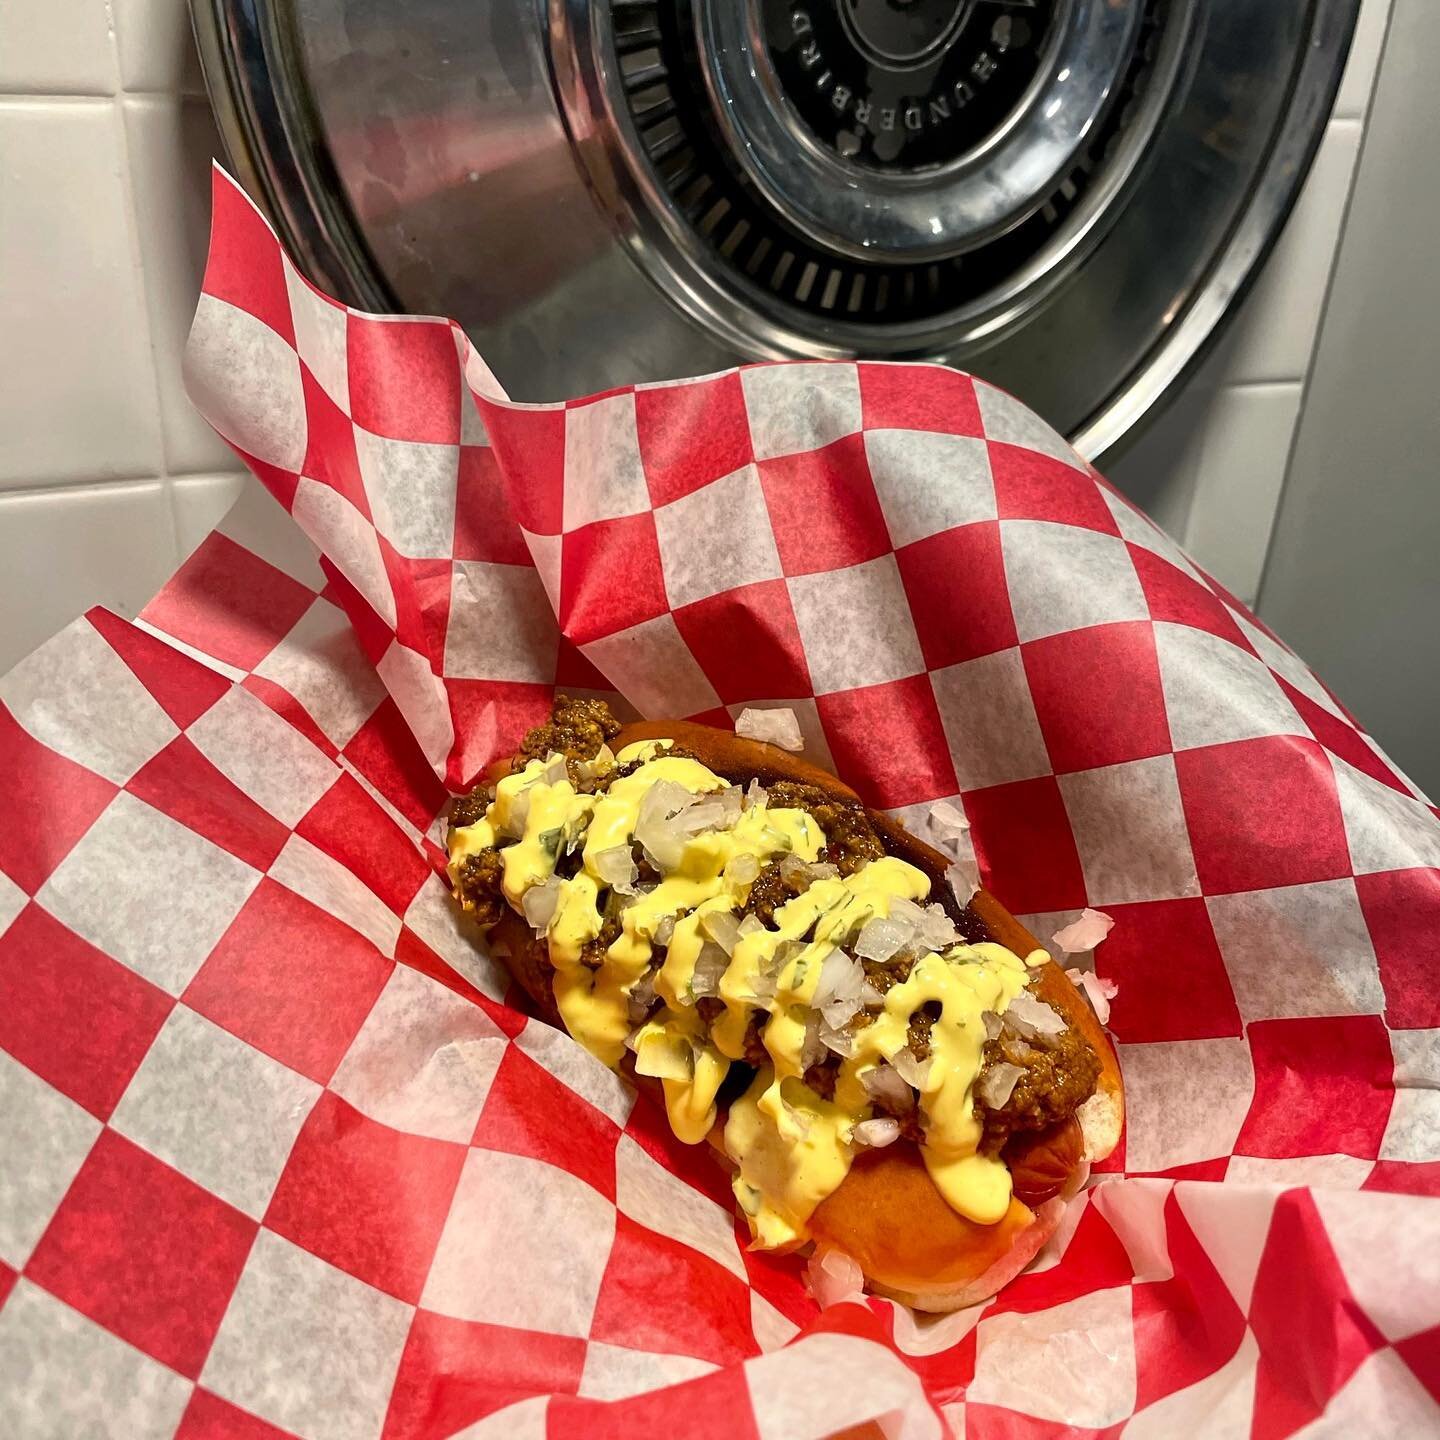 The mexiconey is calling your name! 🌭 

All beef Frank, House adobo coney sauce, fresh minced onion, and our signature mostazanaise. A Mexican take on a Detroit classic. 🤤

Get one at Gordito&rsquo;s today

#coneys #indyfoodlove #localbusiness #eat